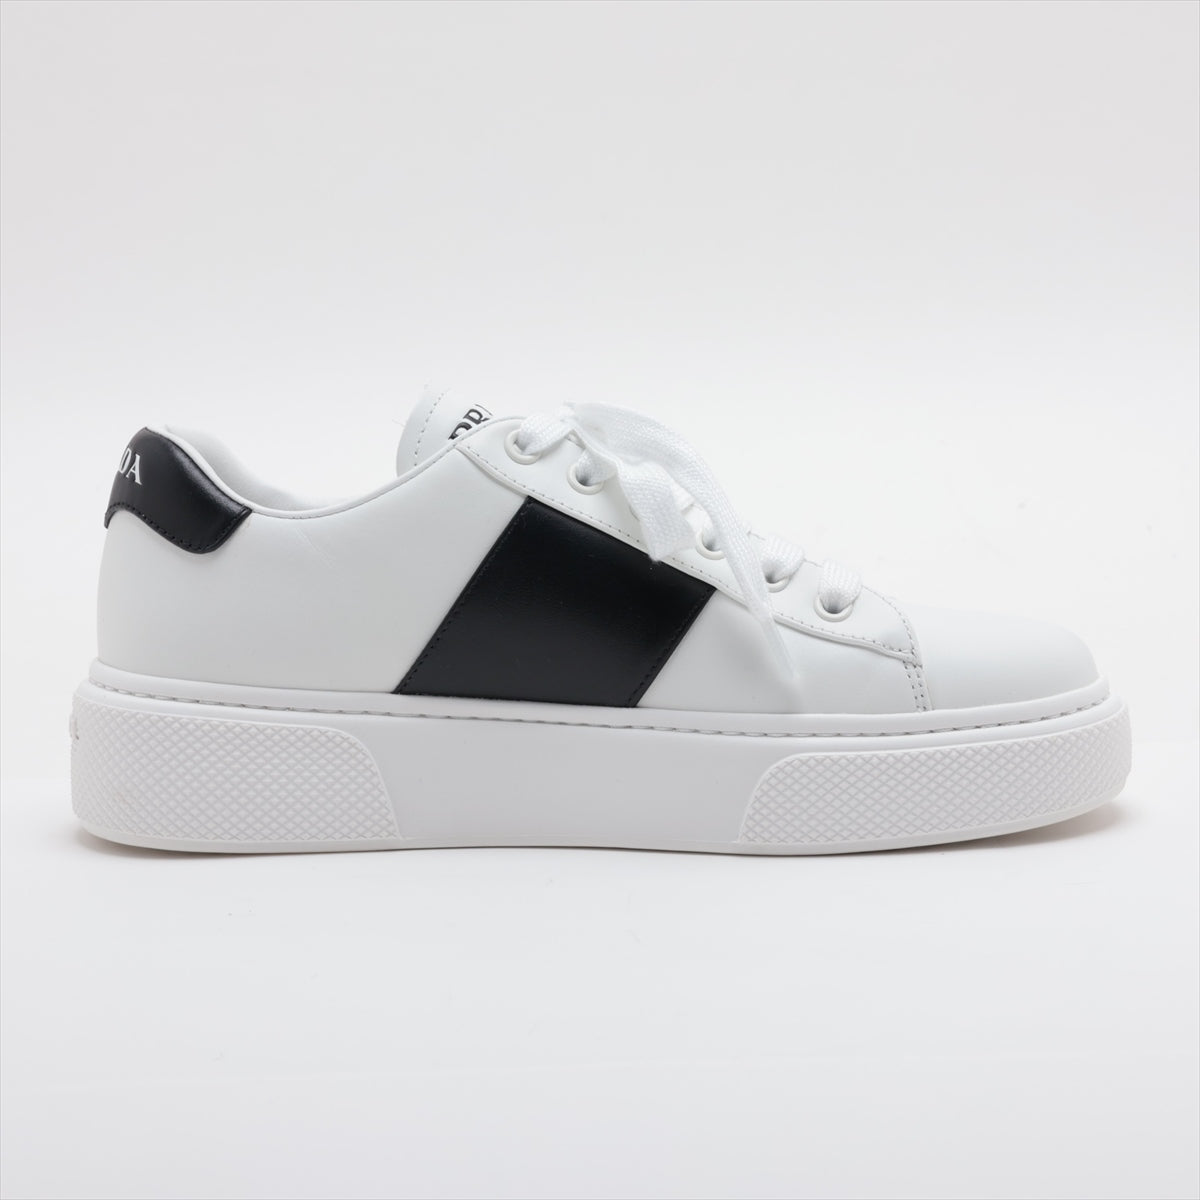 Prada Sport Leather Sneakers 36.5 Ladies' Black × White 1E223M There is a box